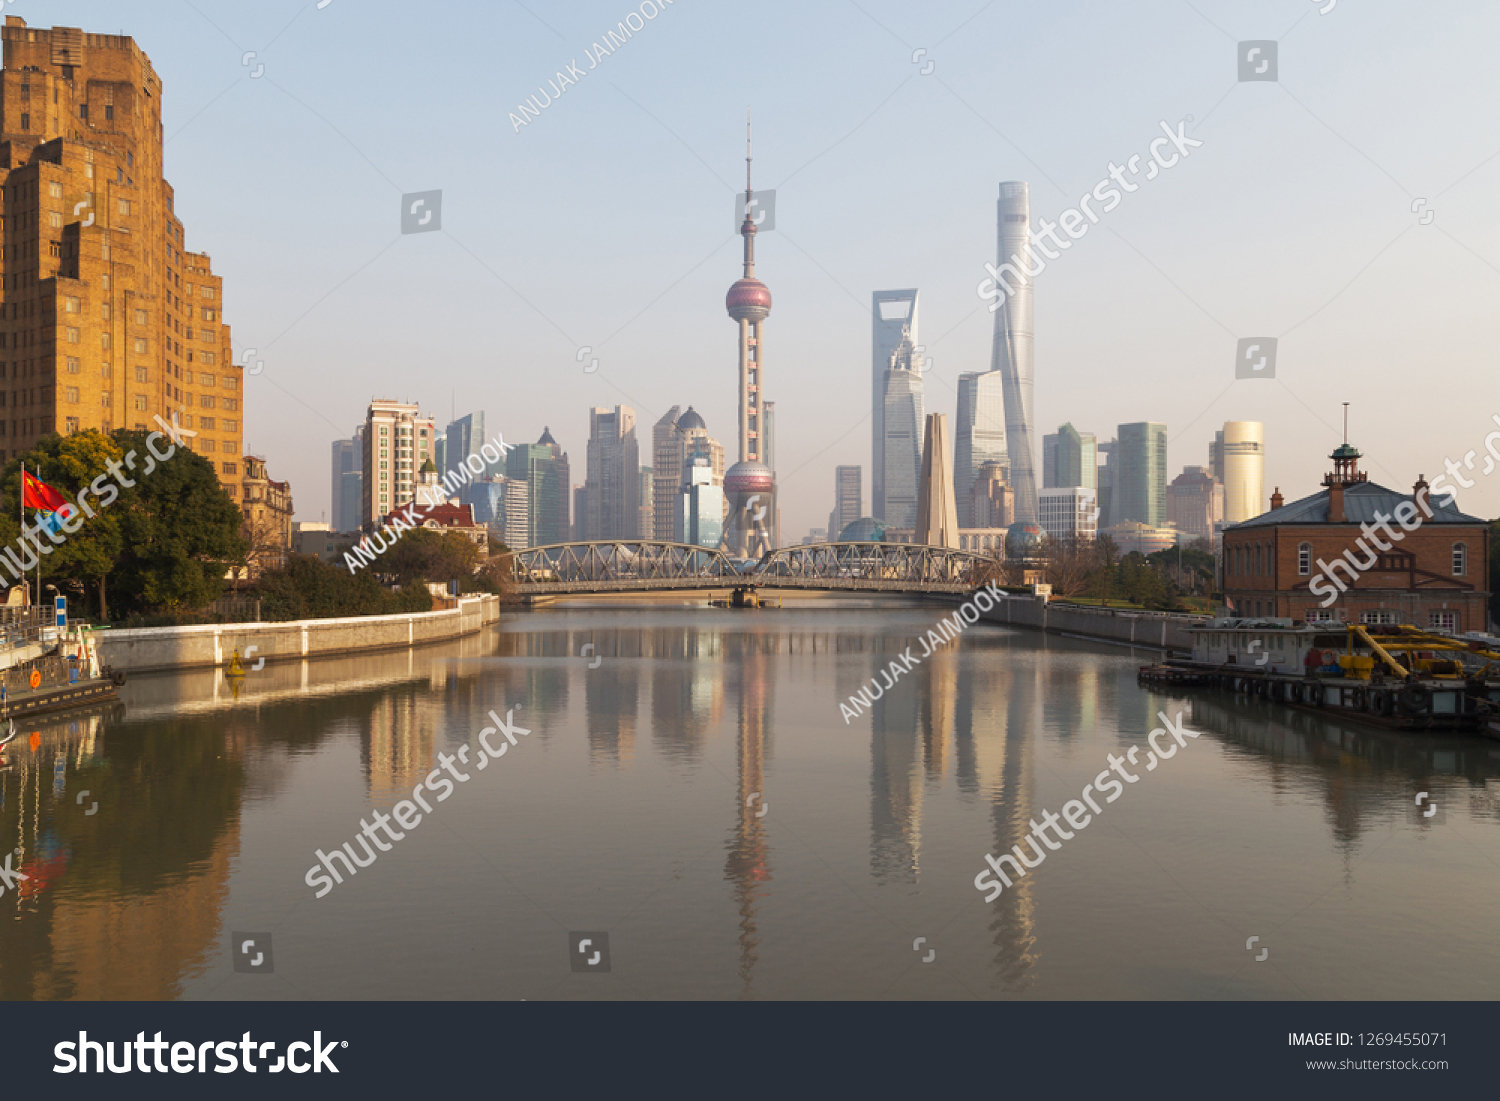 Shanghai is known as “The Pearl of Asia” and “The Paris of the East”. It's a city of youth, commerce, and an international beat that runs through each side street and riverwalk.  #1269455071